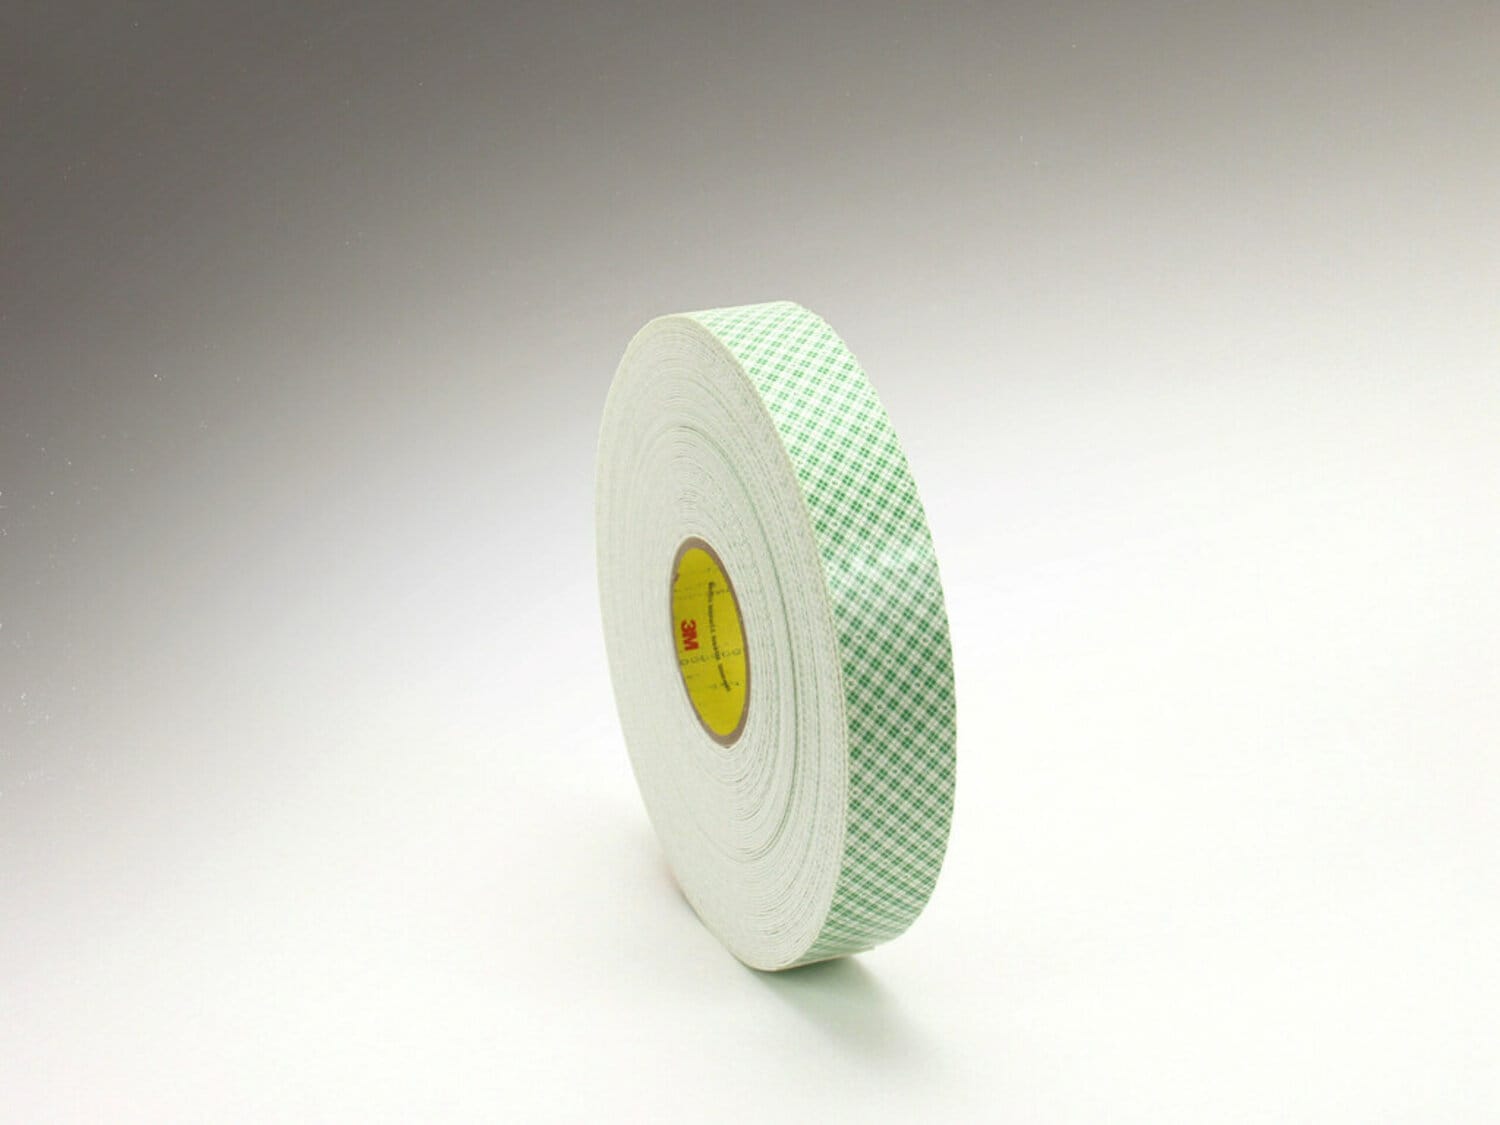 7000048479 - 3M Double Coated Urethane Foam Tape 4016, Off White, 3/4 in x 36 yd, 62
mil, 12 rolls per case